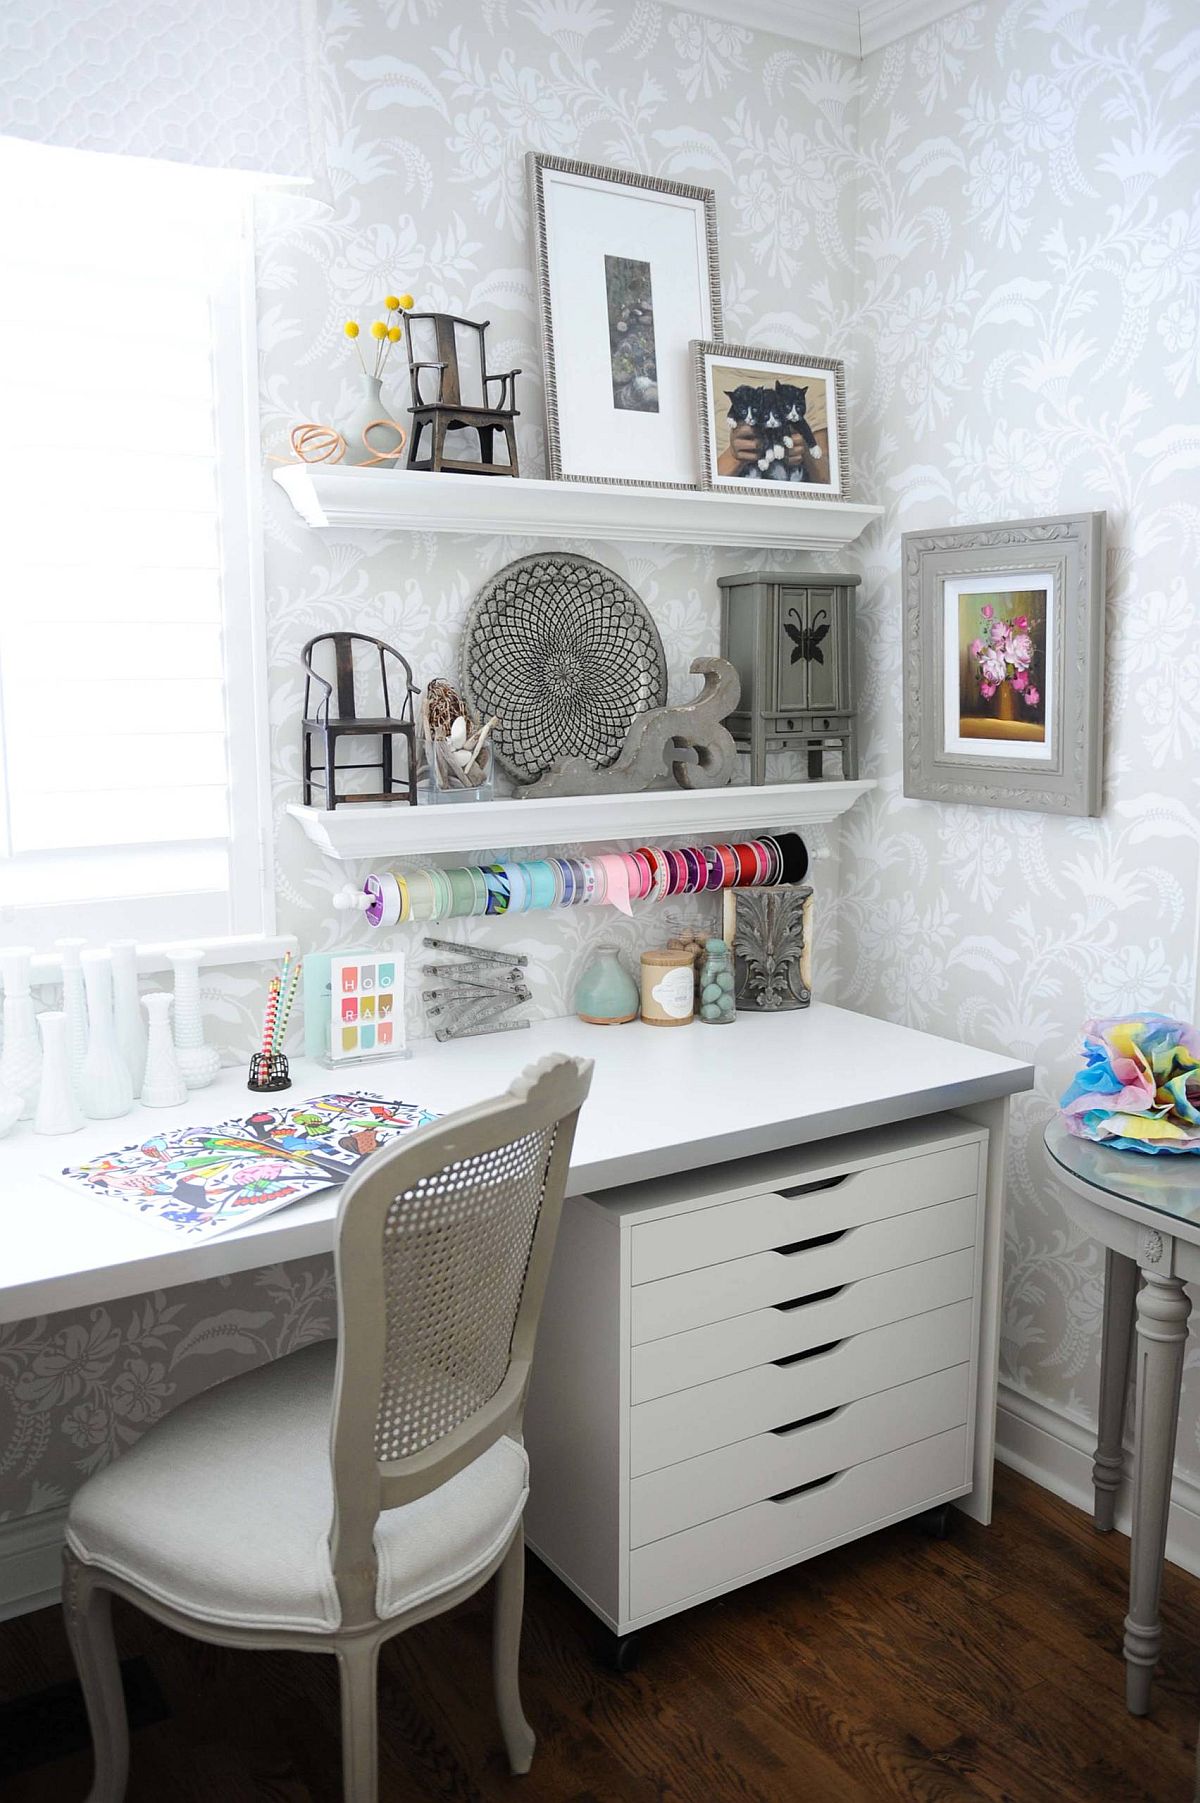 Wallpaper brings floral pattern to this small crafts room in white with clever storage ideas